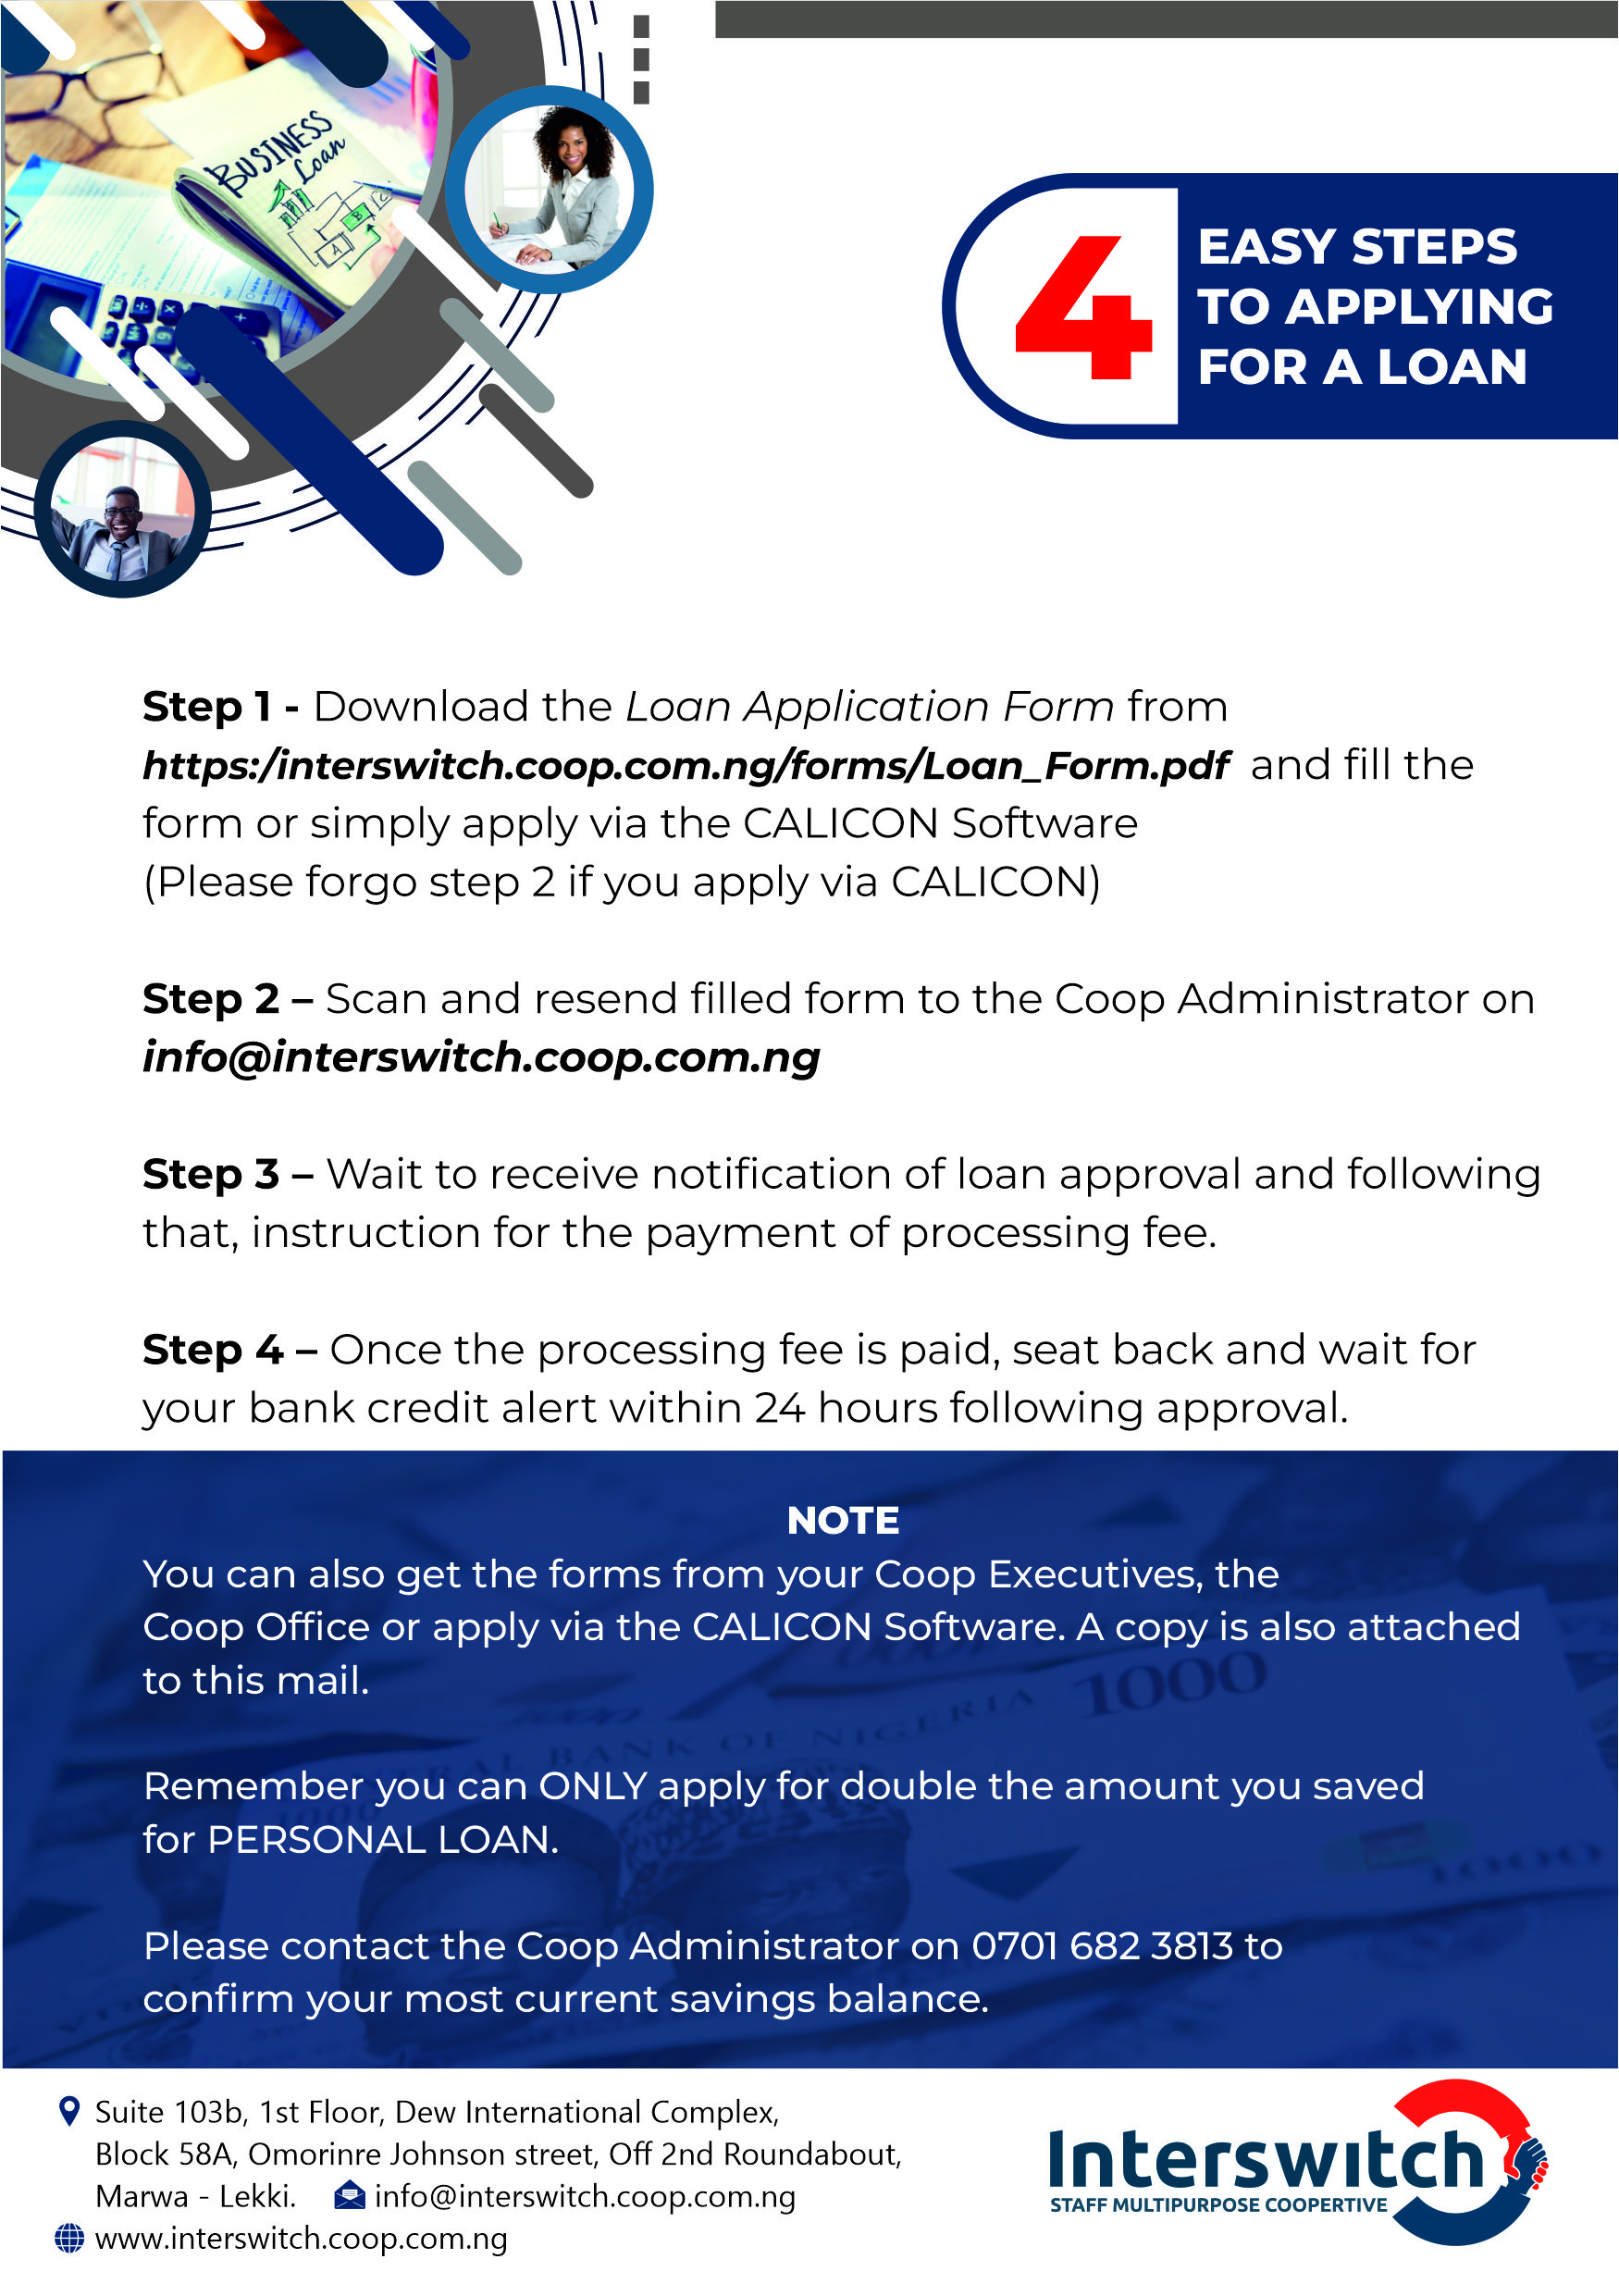 4 Easy Steps to Applying for a Loan